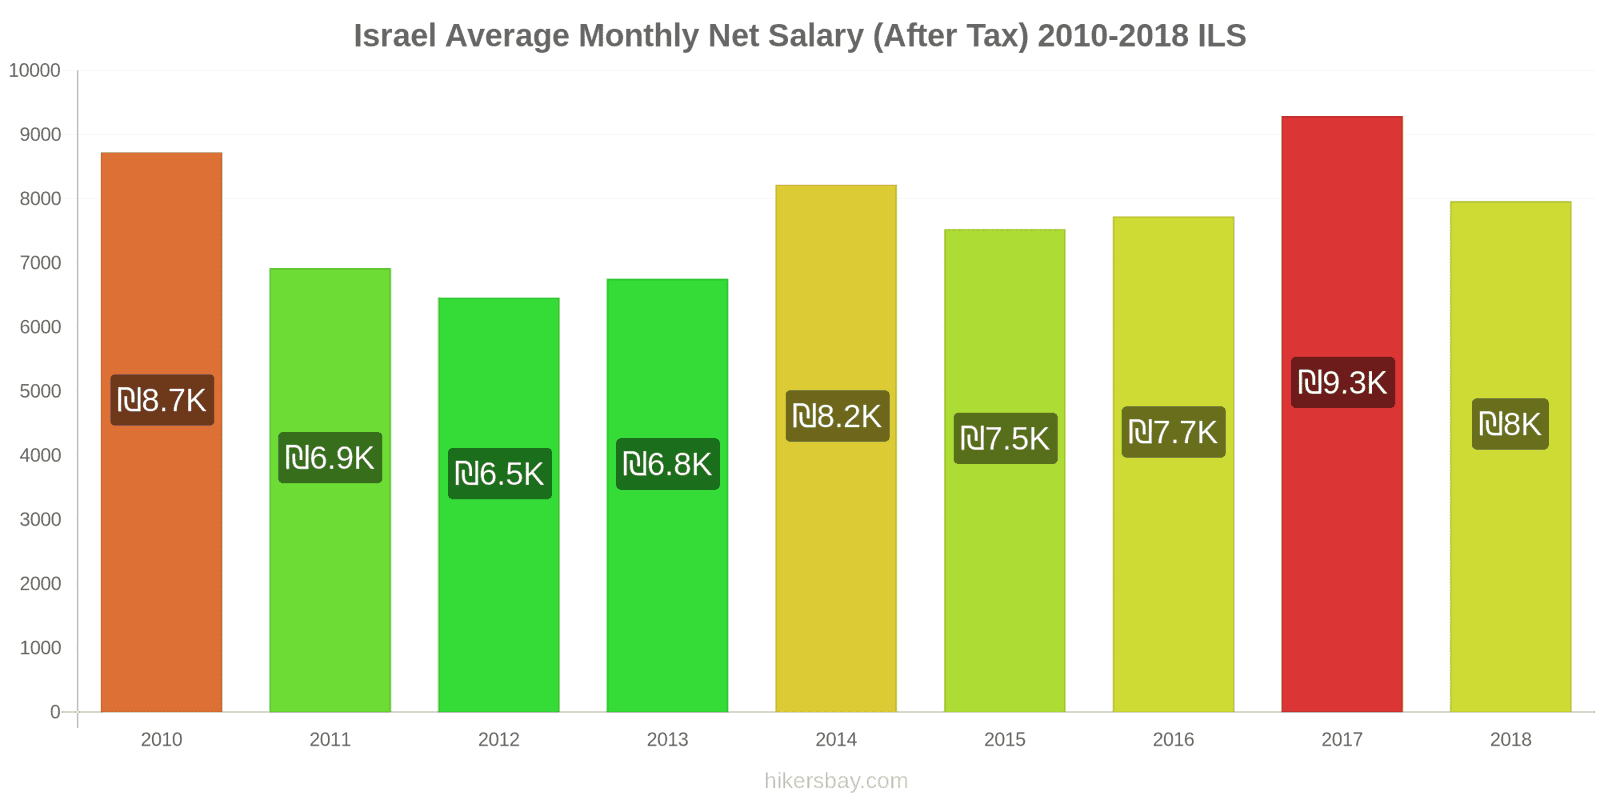 Israel price changes Average Monthly Net Salary (After Tax) hikersbay.com